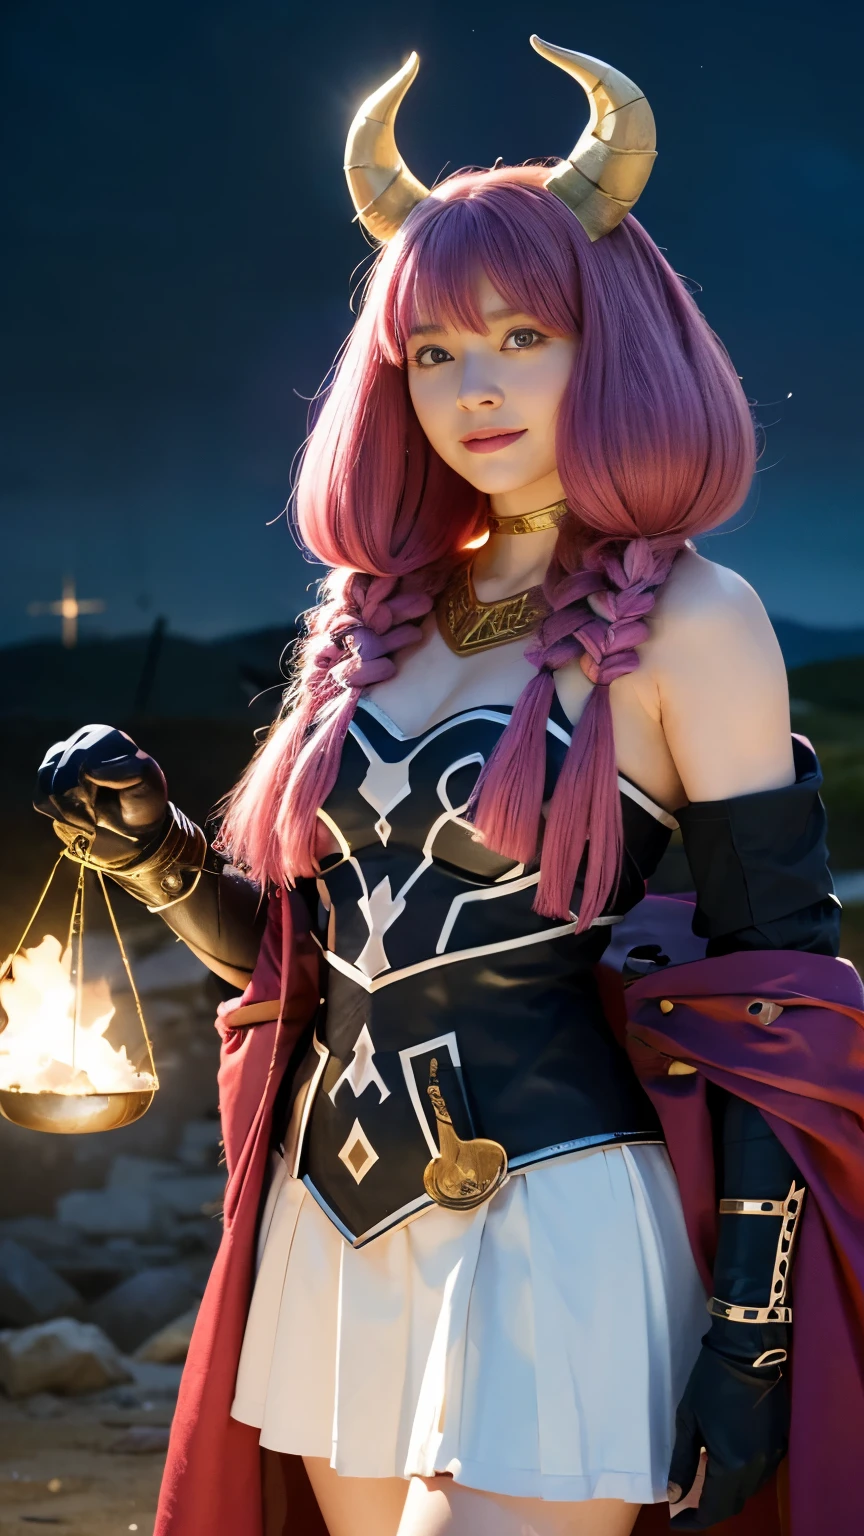 live-action, photo of, A hyper-realistic movie photograph inspired by the character Aura from 'Frieren: Beyond Journey's End', A hyper-realistic movie photograph featuring an anime character standing on a battlefield at night. The character has long pink hair with braids on both sides. She has a confident smile and is wearing black chest plate armor, decorative pauldrons on her shoulders, white skirt, and black boots. She has large horns on her head and is wearing a decorative necklace around her neck. She is holding a golden scale in her hand. The background depicts a battlefield with remnants of armor and a dark black  night sky.